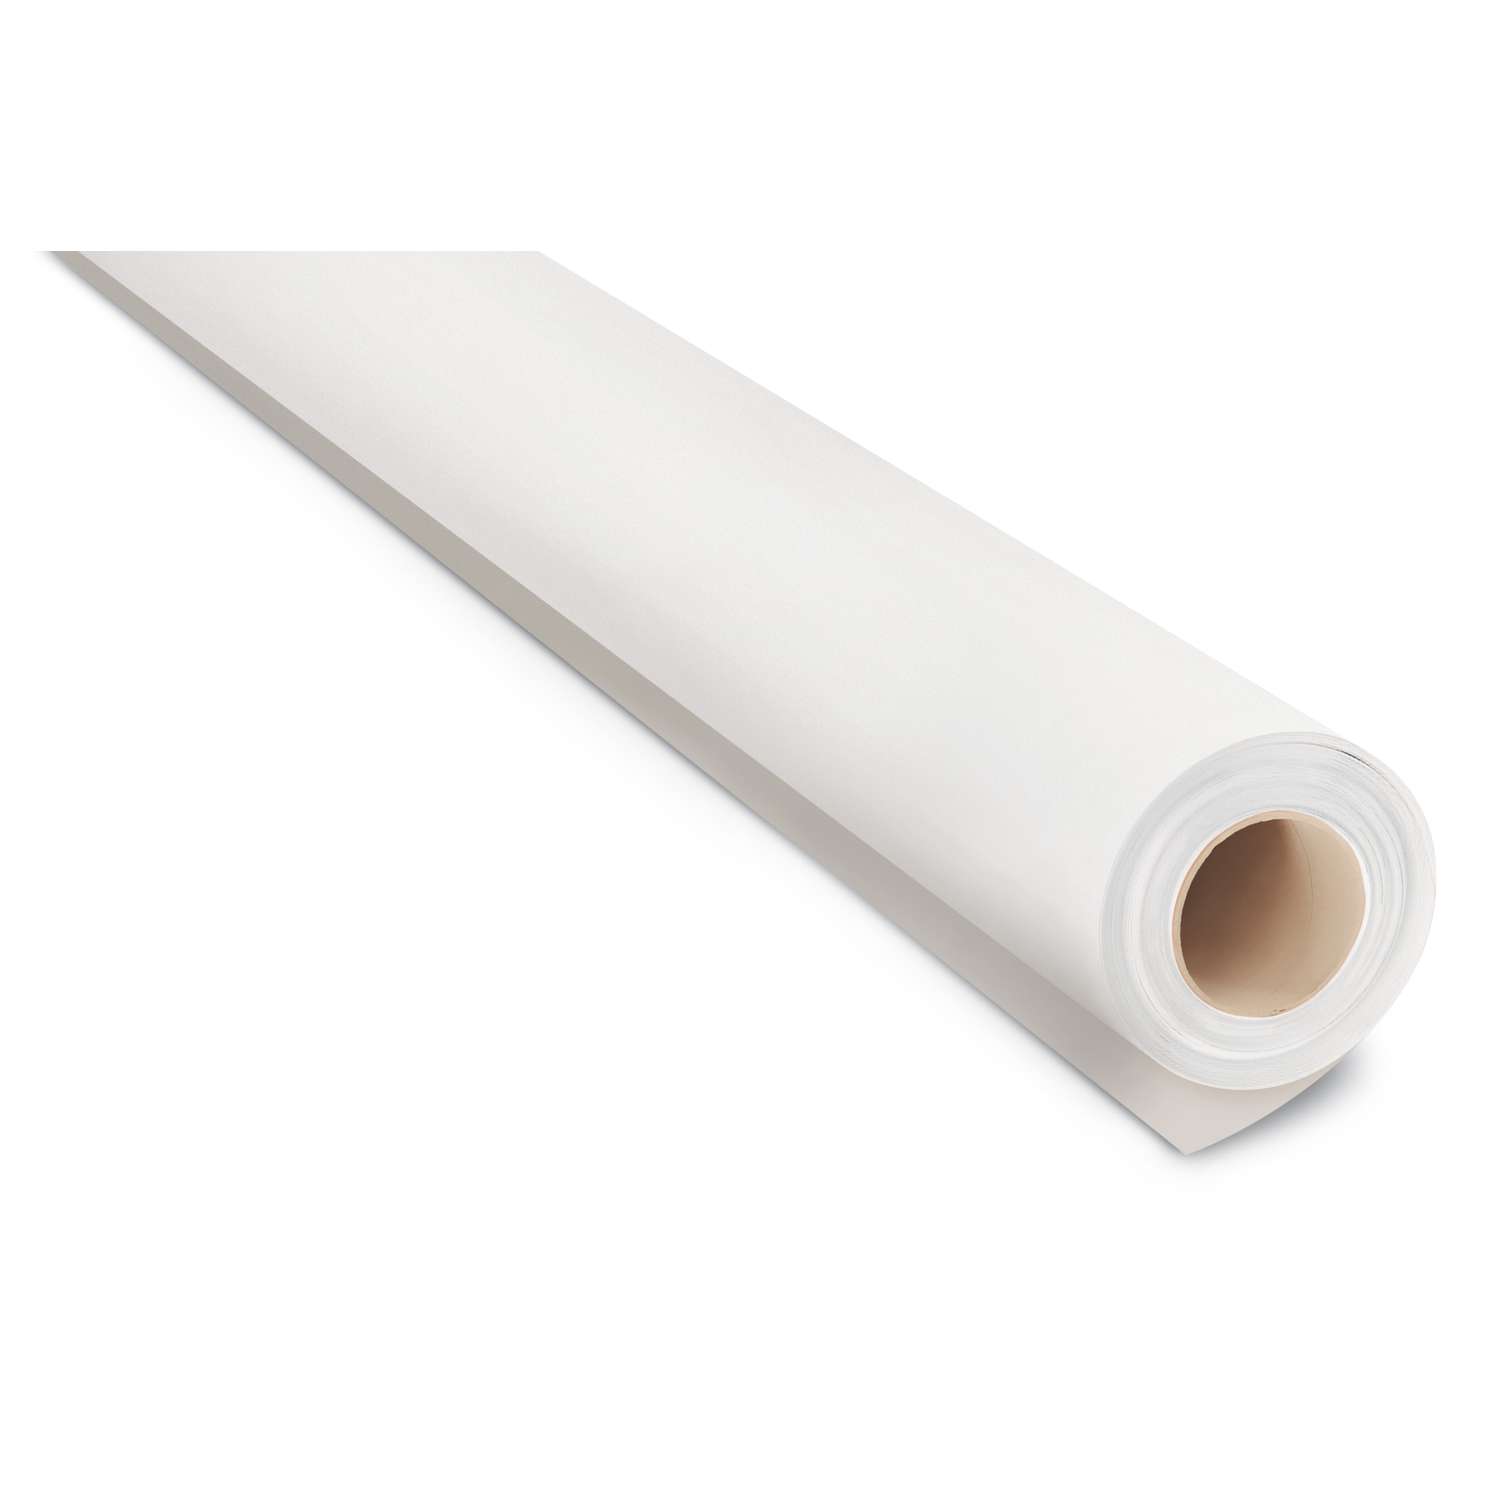 CANSON Packpapier-Rolle 1 x 10 m 1 x 10 m weiß